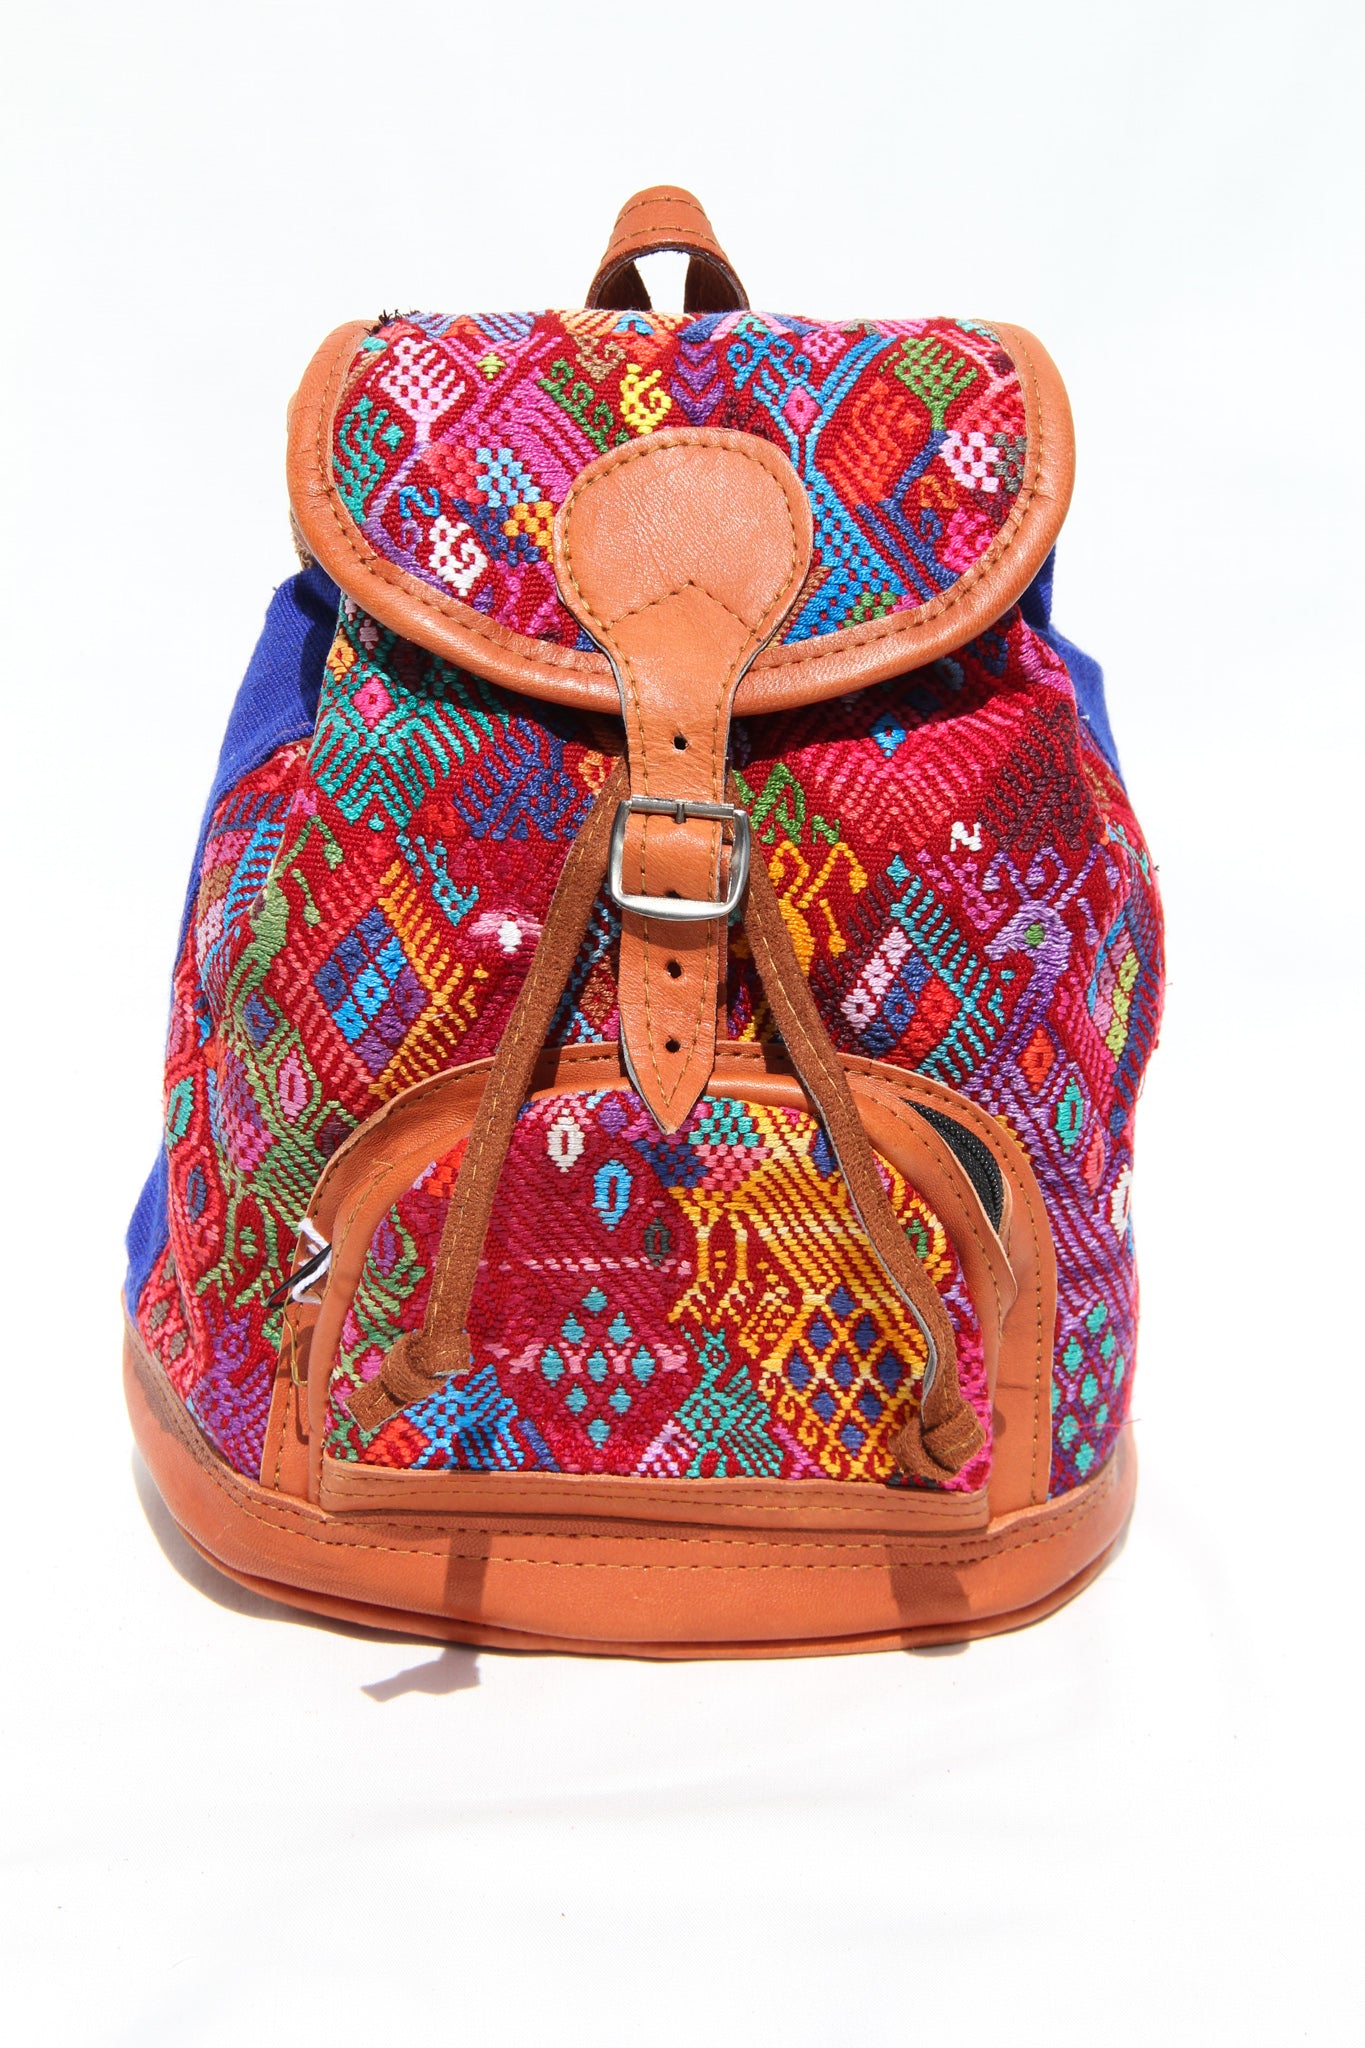 MIni leather huipil backpack hand woven with colorful embroidery and adjustable leather straps with front  belt buckle closure and front zipper pocket perfect for hiking or beach trip